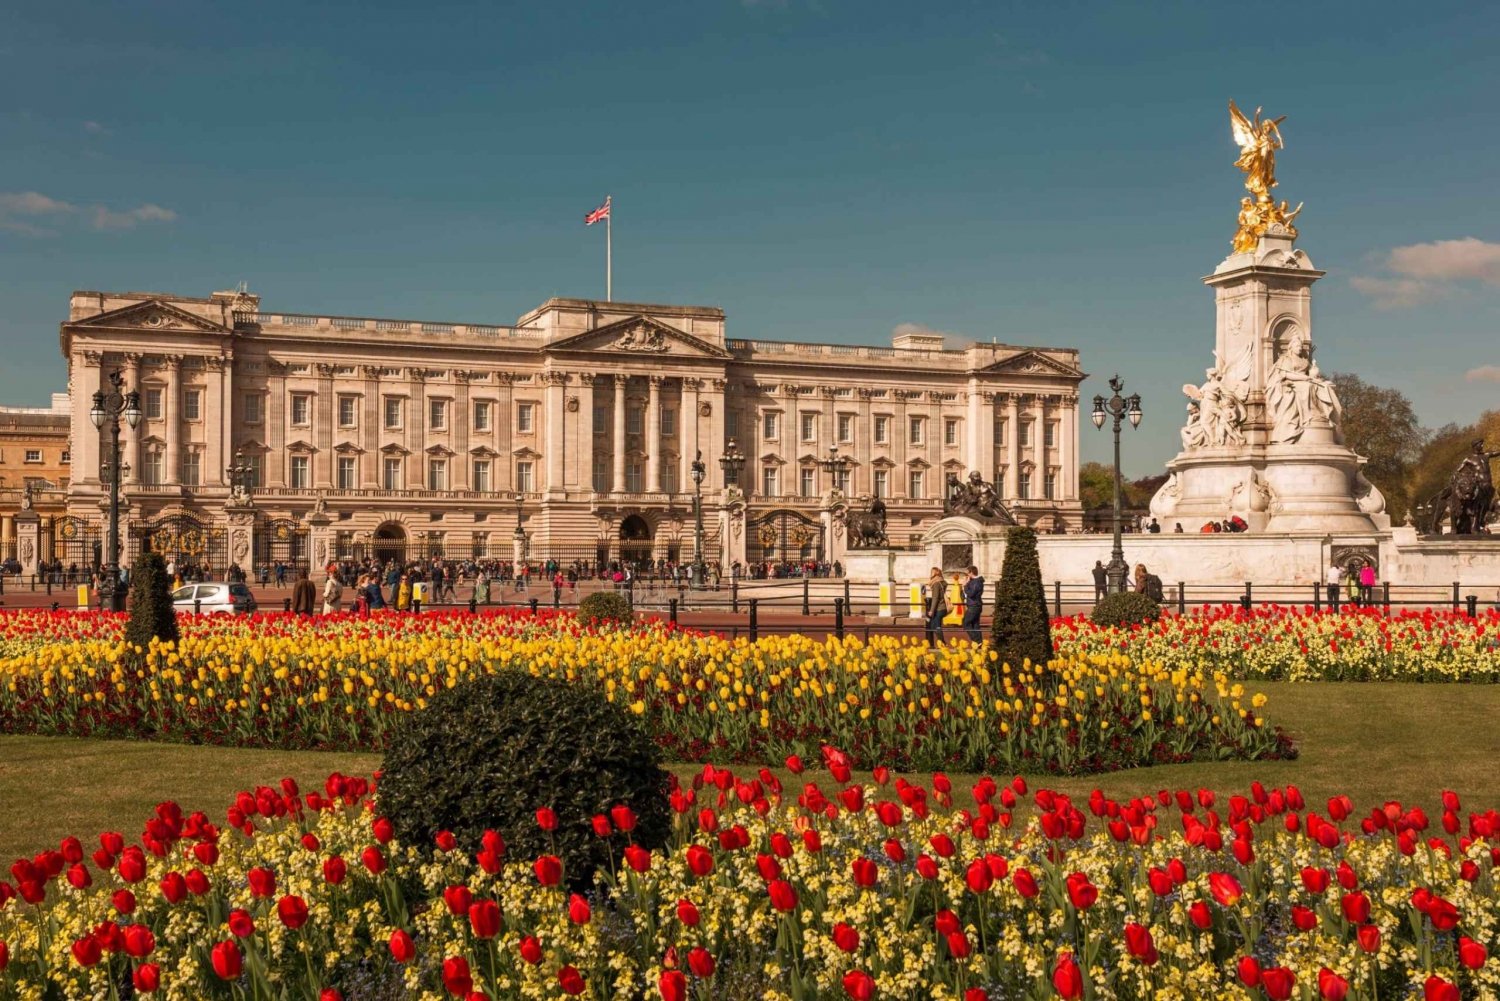 London: Self-Guided Mystery Tour by Buckingham Palace (ENG)